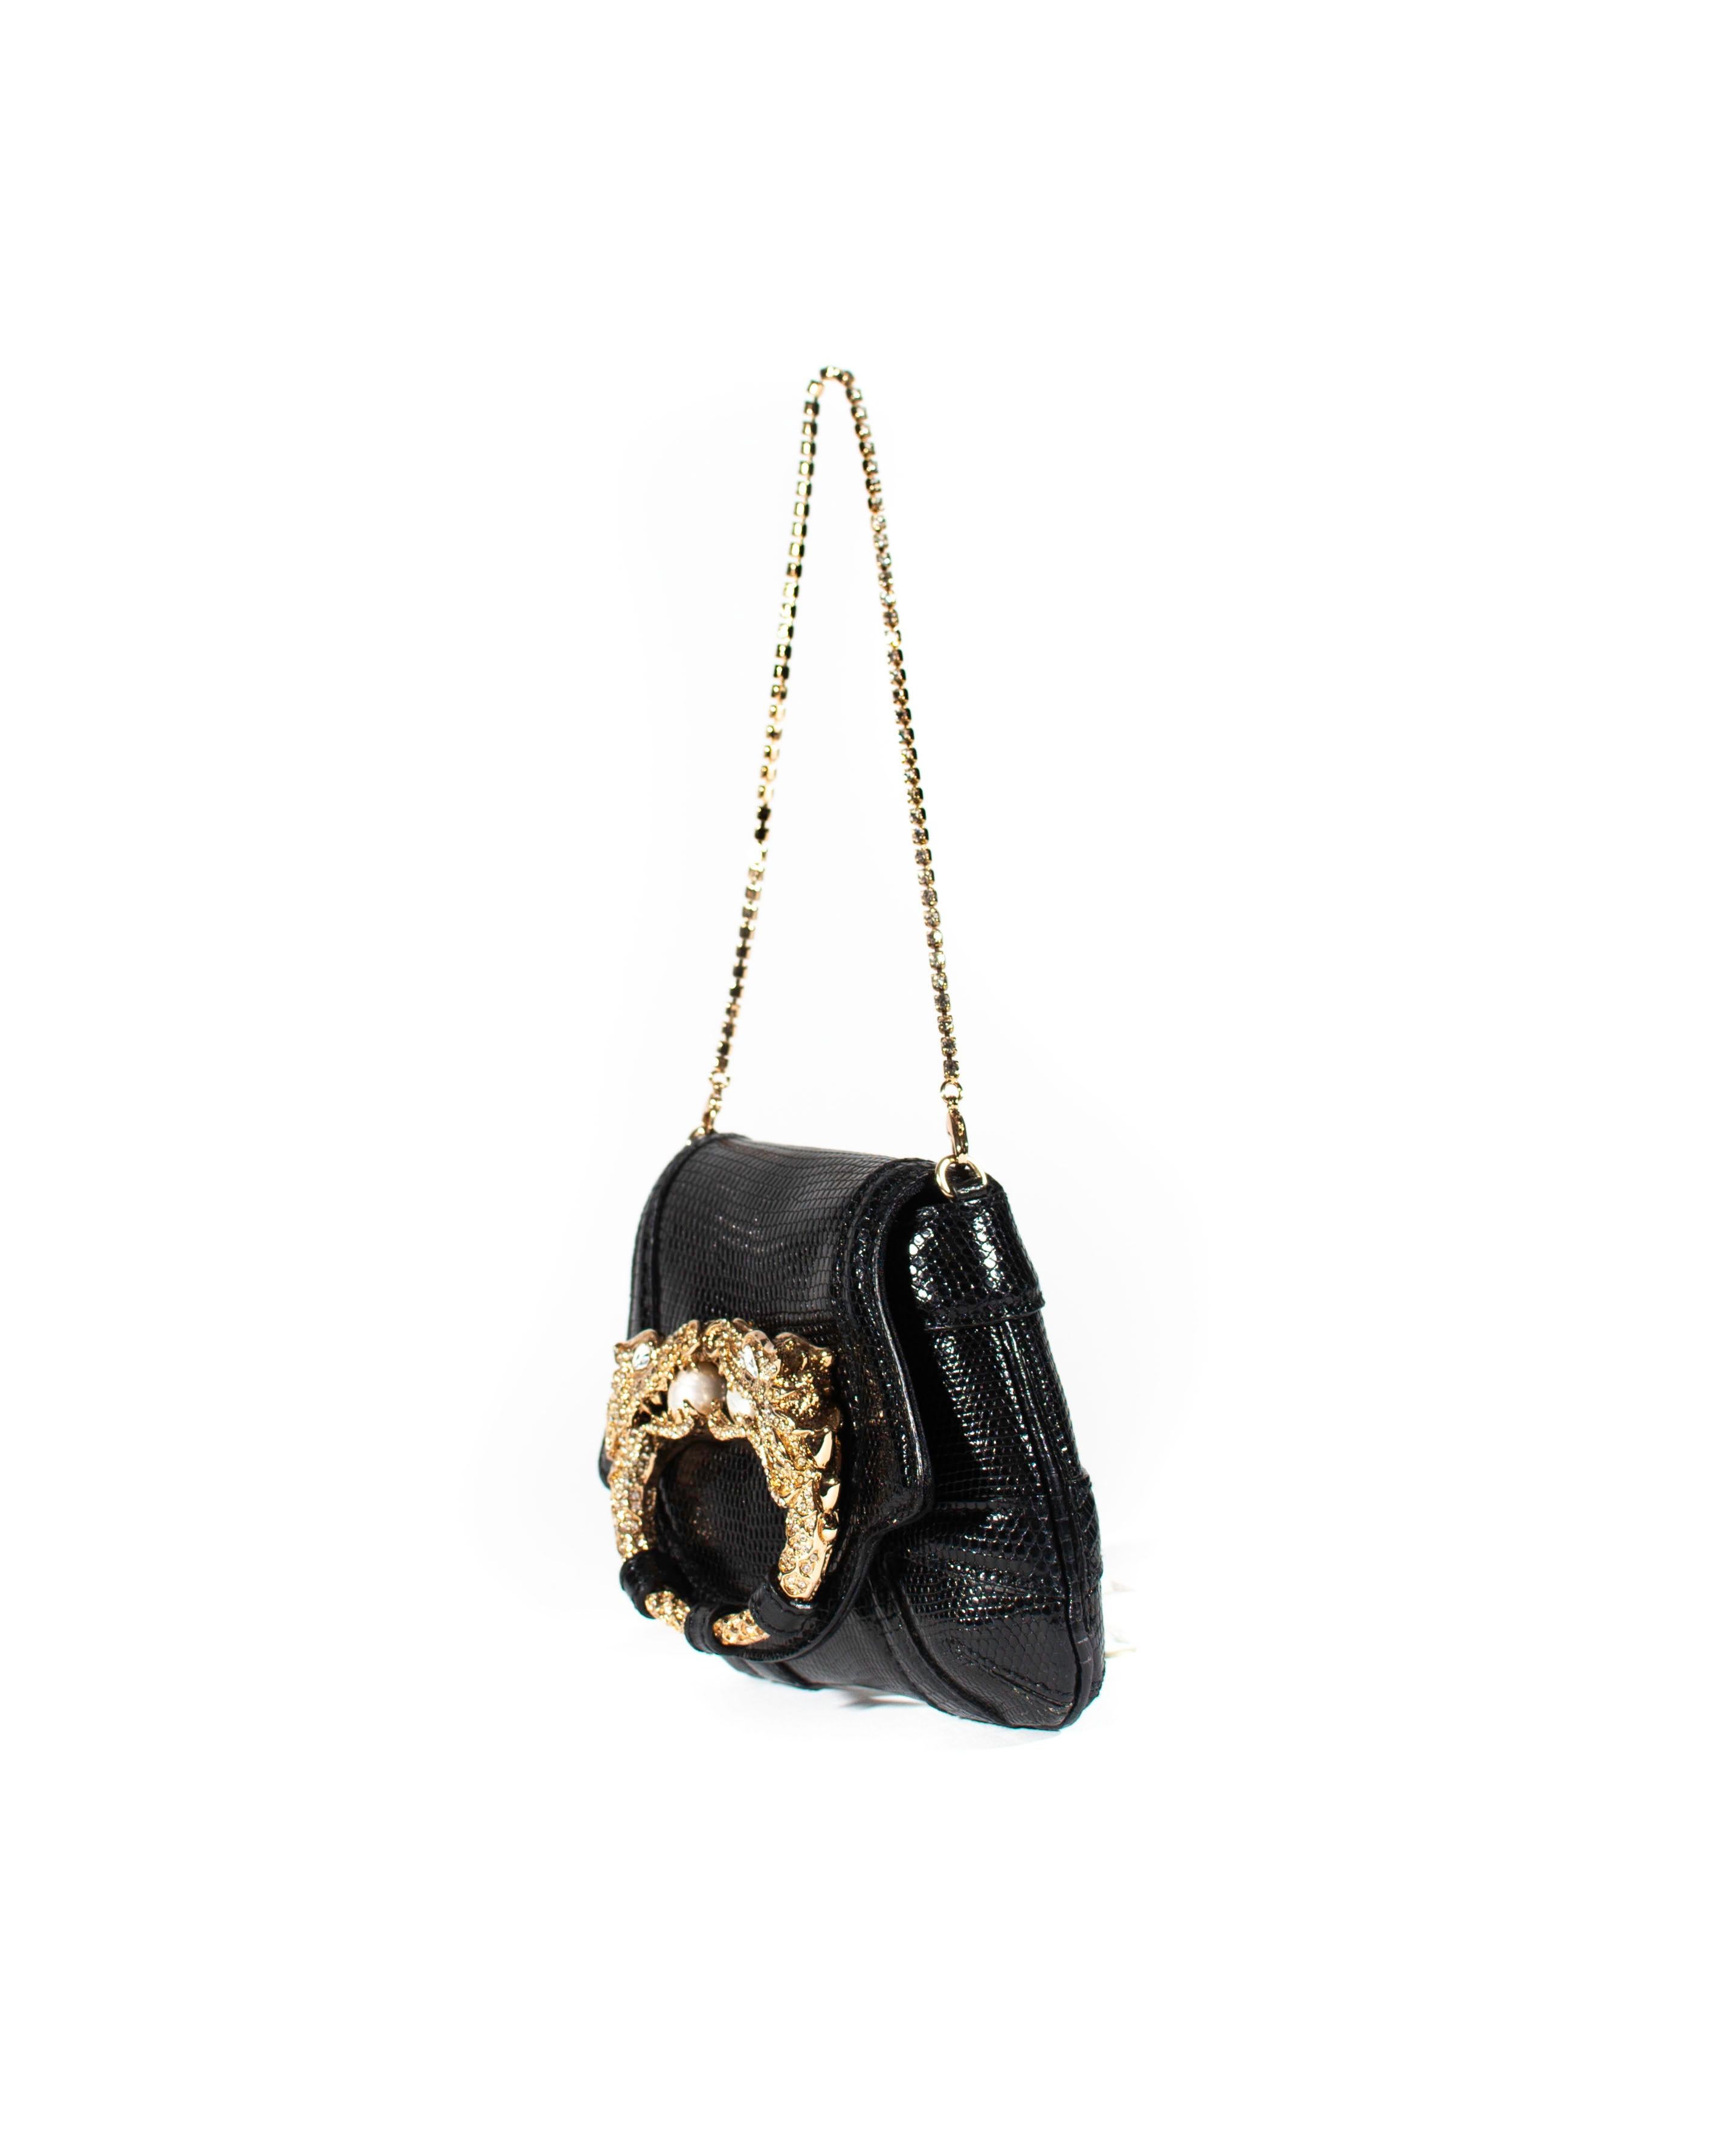 TheRealList presents: a fabulous black lizard skin mini F/W Gucci bag with a dragon accent, designed by Tom Ford. This petite bag can be used as a mini bag or as a clutch when the rhinestone chain handle is removed. The bag was debuted on the F/W